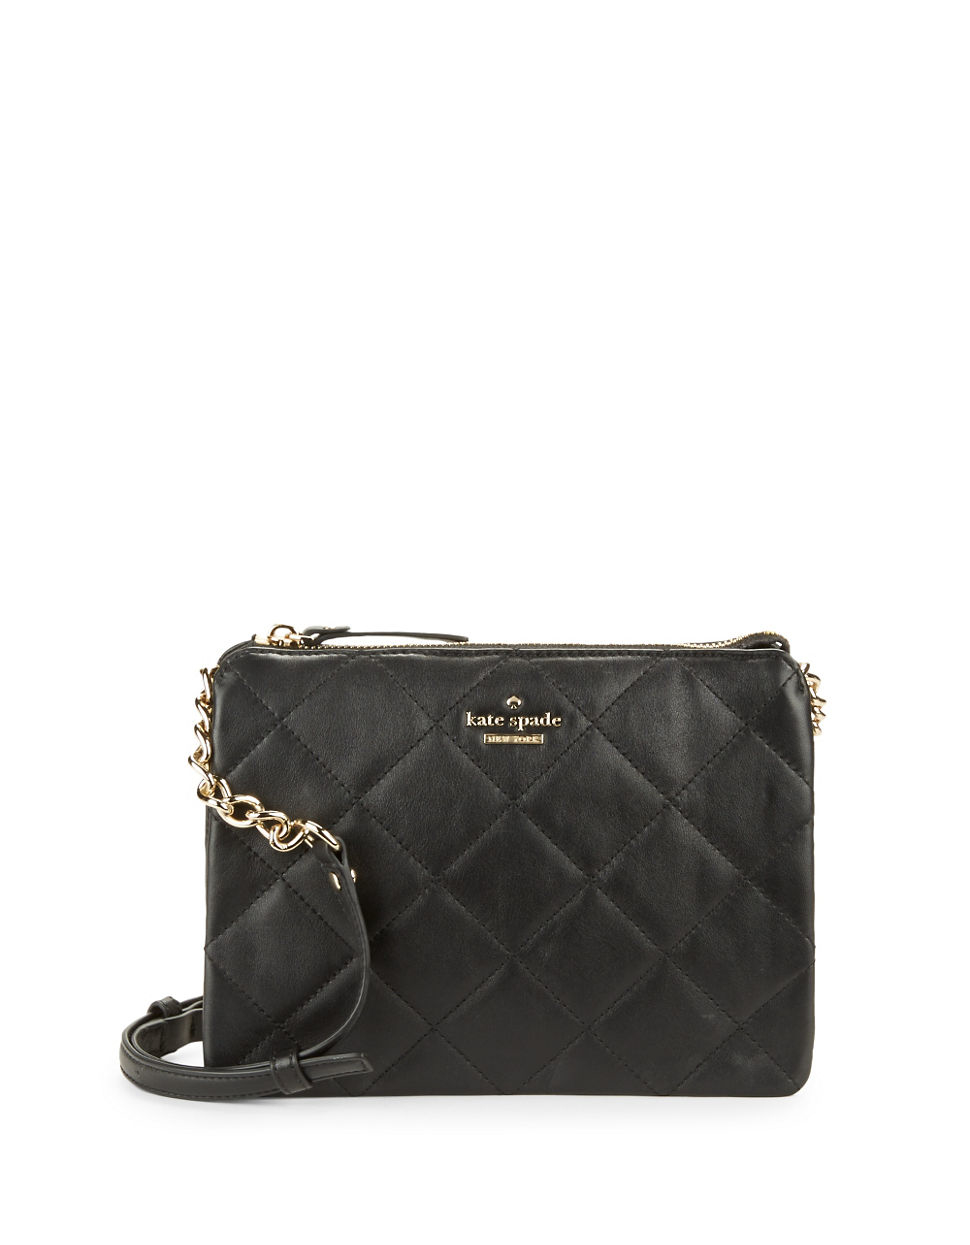 Kate spade Harbor Quilted Leather Crossbody in Black | Lyst